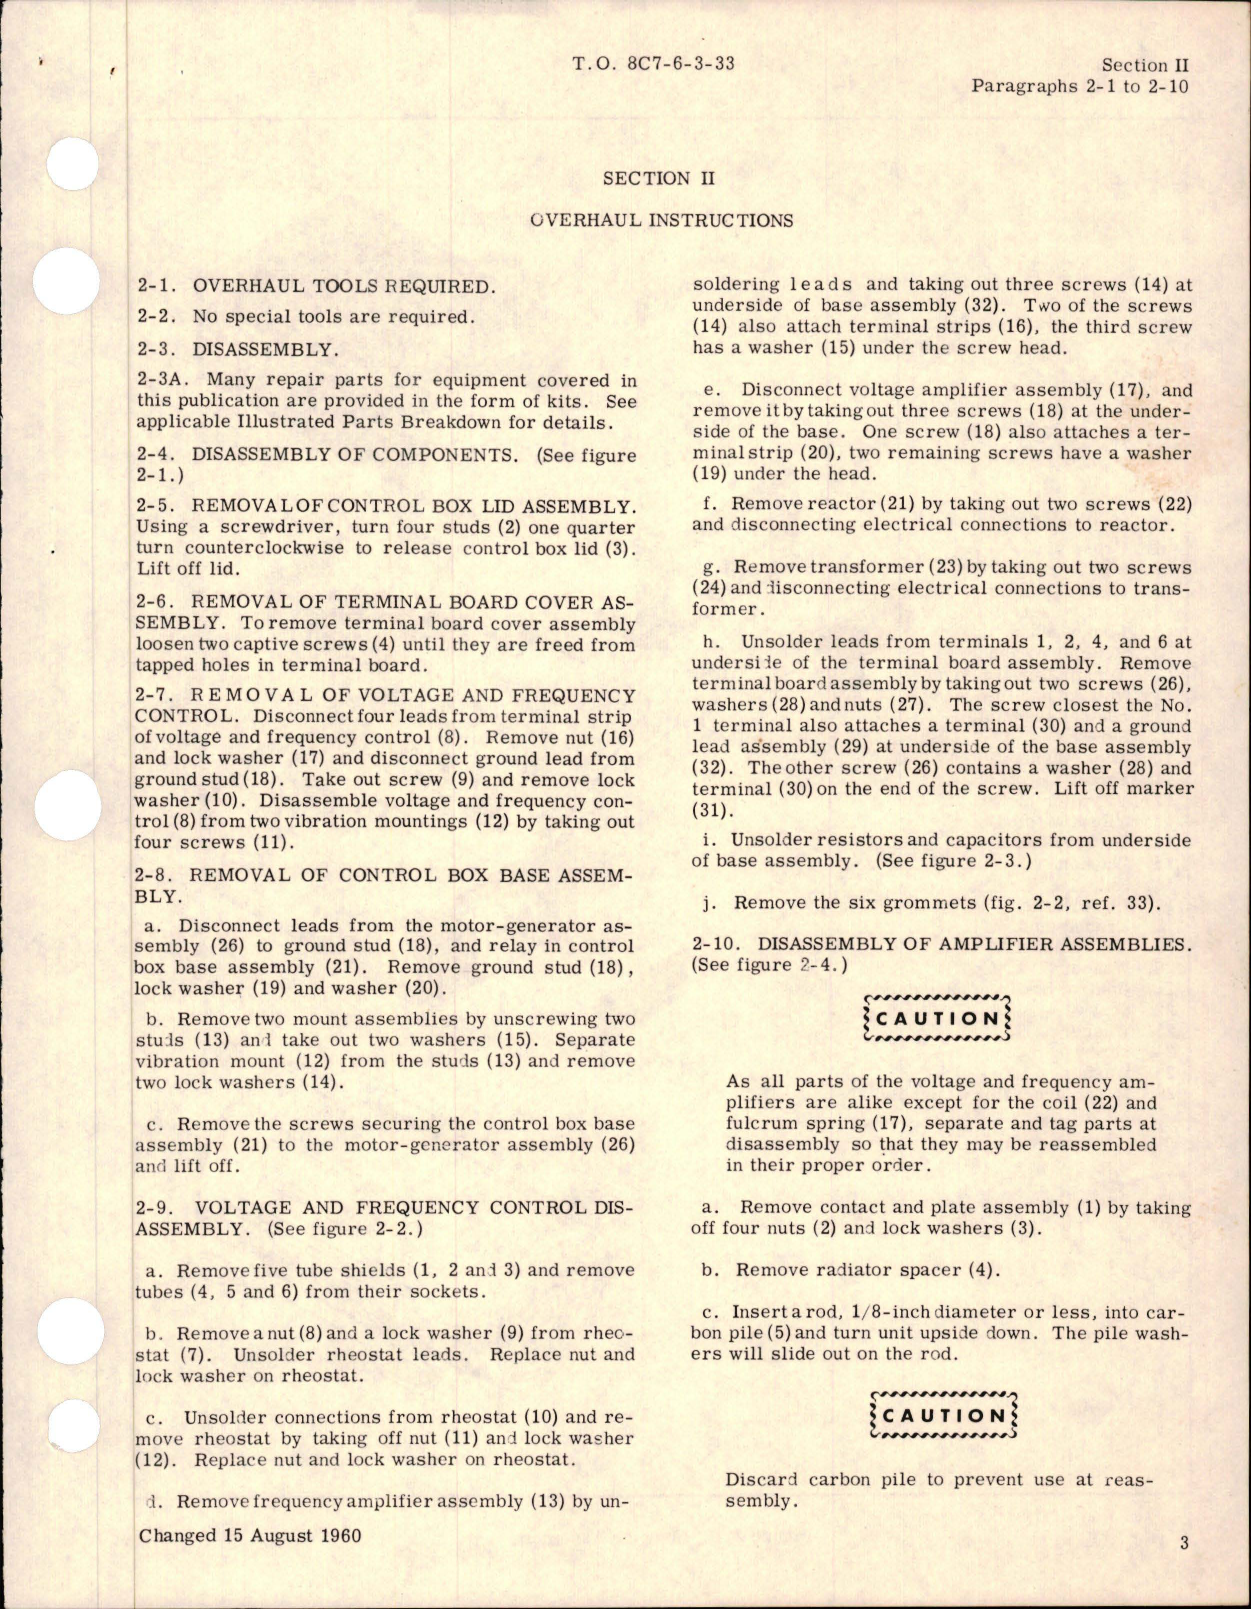 Sample page 7 from AirCorps Library document: Overhaul for Inverter Assembly - AN 3515-1 - Parts SD-135-4 and SD-135-4A